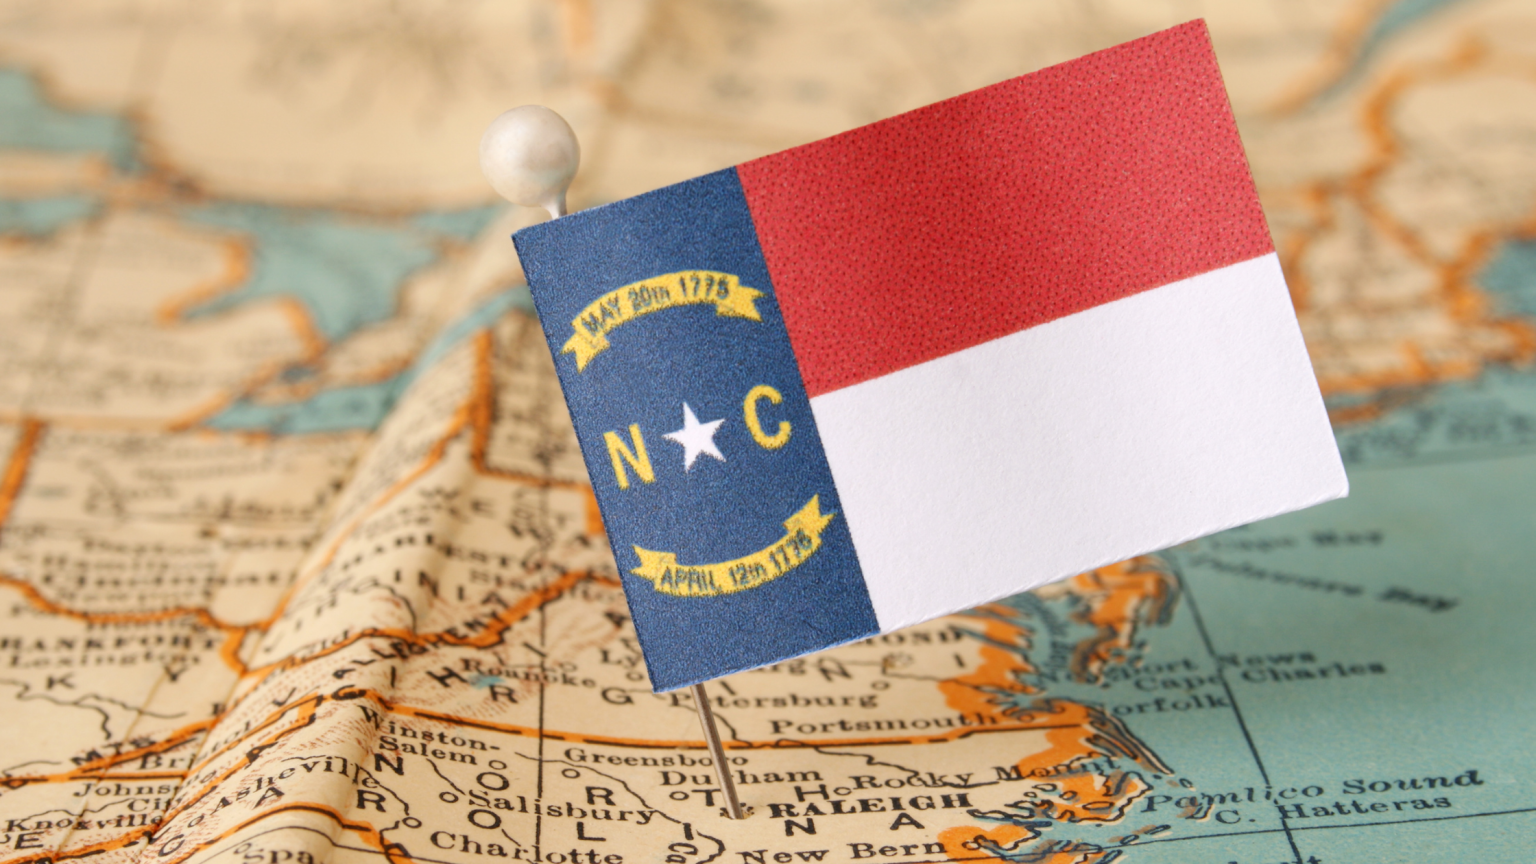 NC state flag pinned on United States map in the spot of North Carolina.